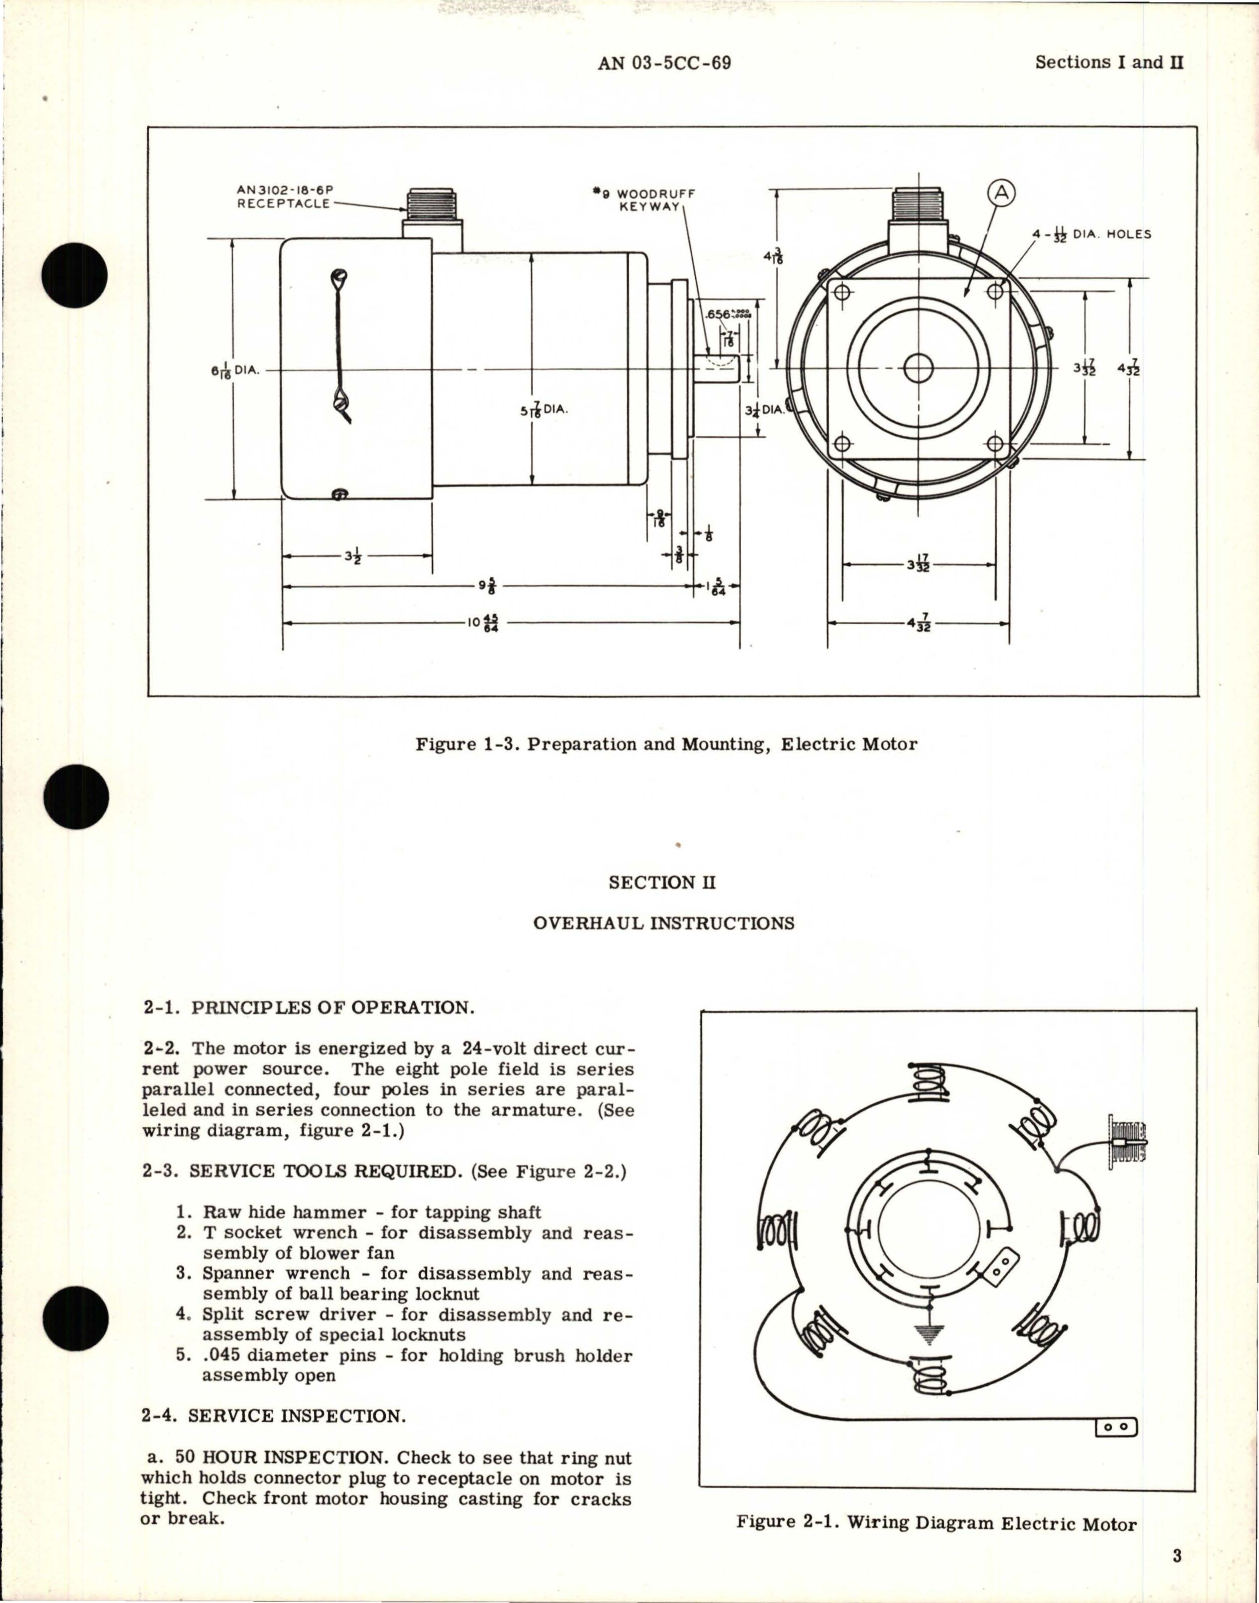 Sample page 7 from AirCorps Library document: Overhaul Instructions for Electric Motors - Models BM517-2, -5, -5A, -5B